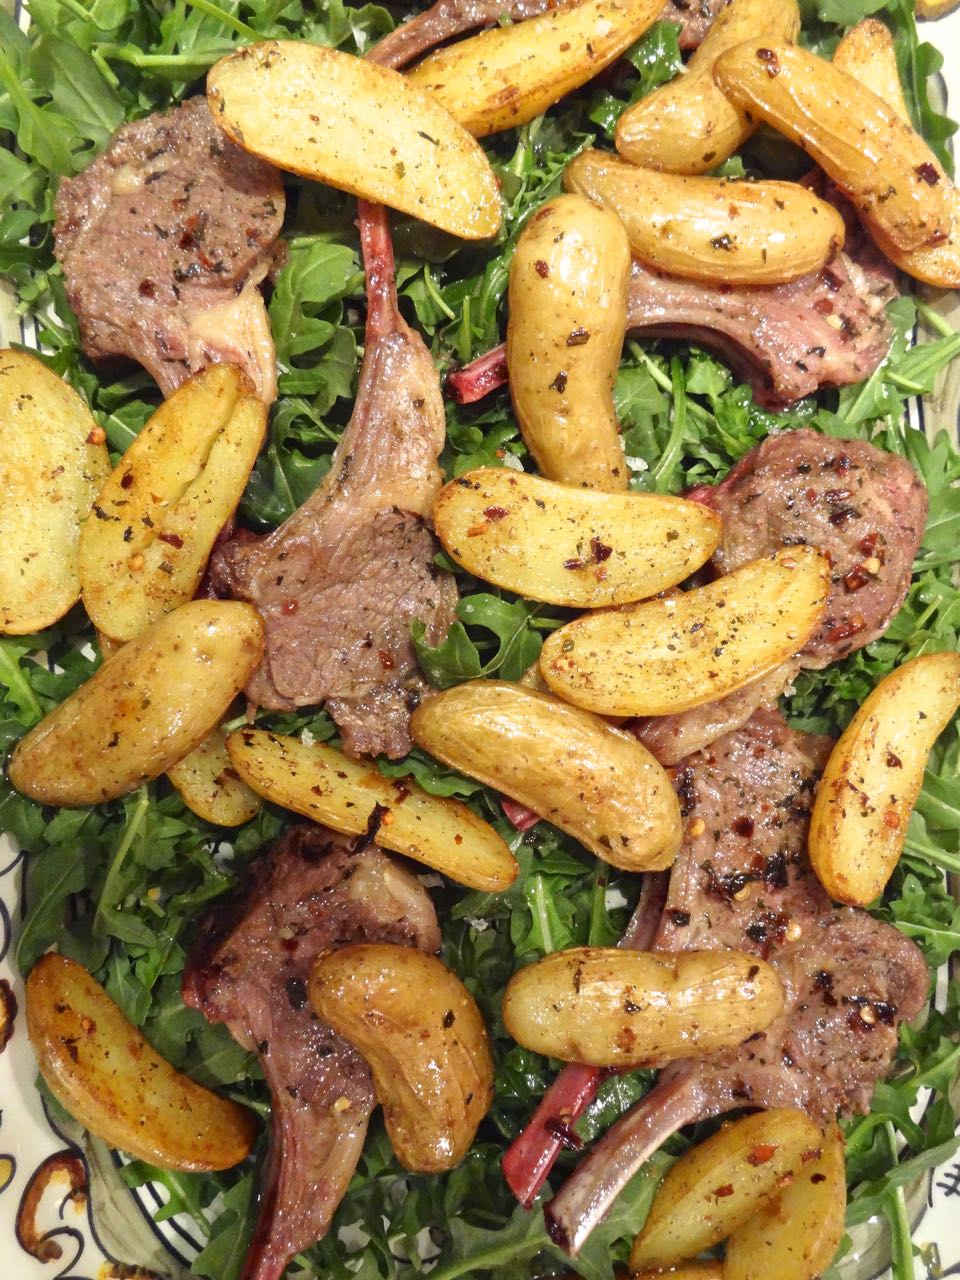 Scrumpdillyicious: Lamb Chops with Fingerling Potatoes on Arugula